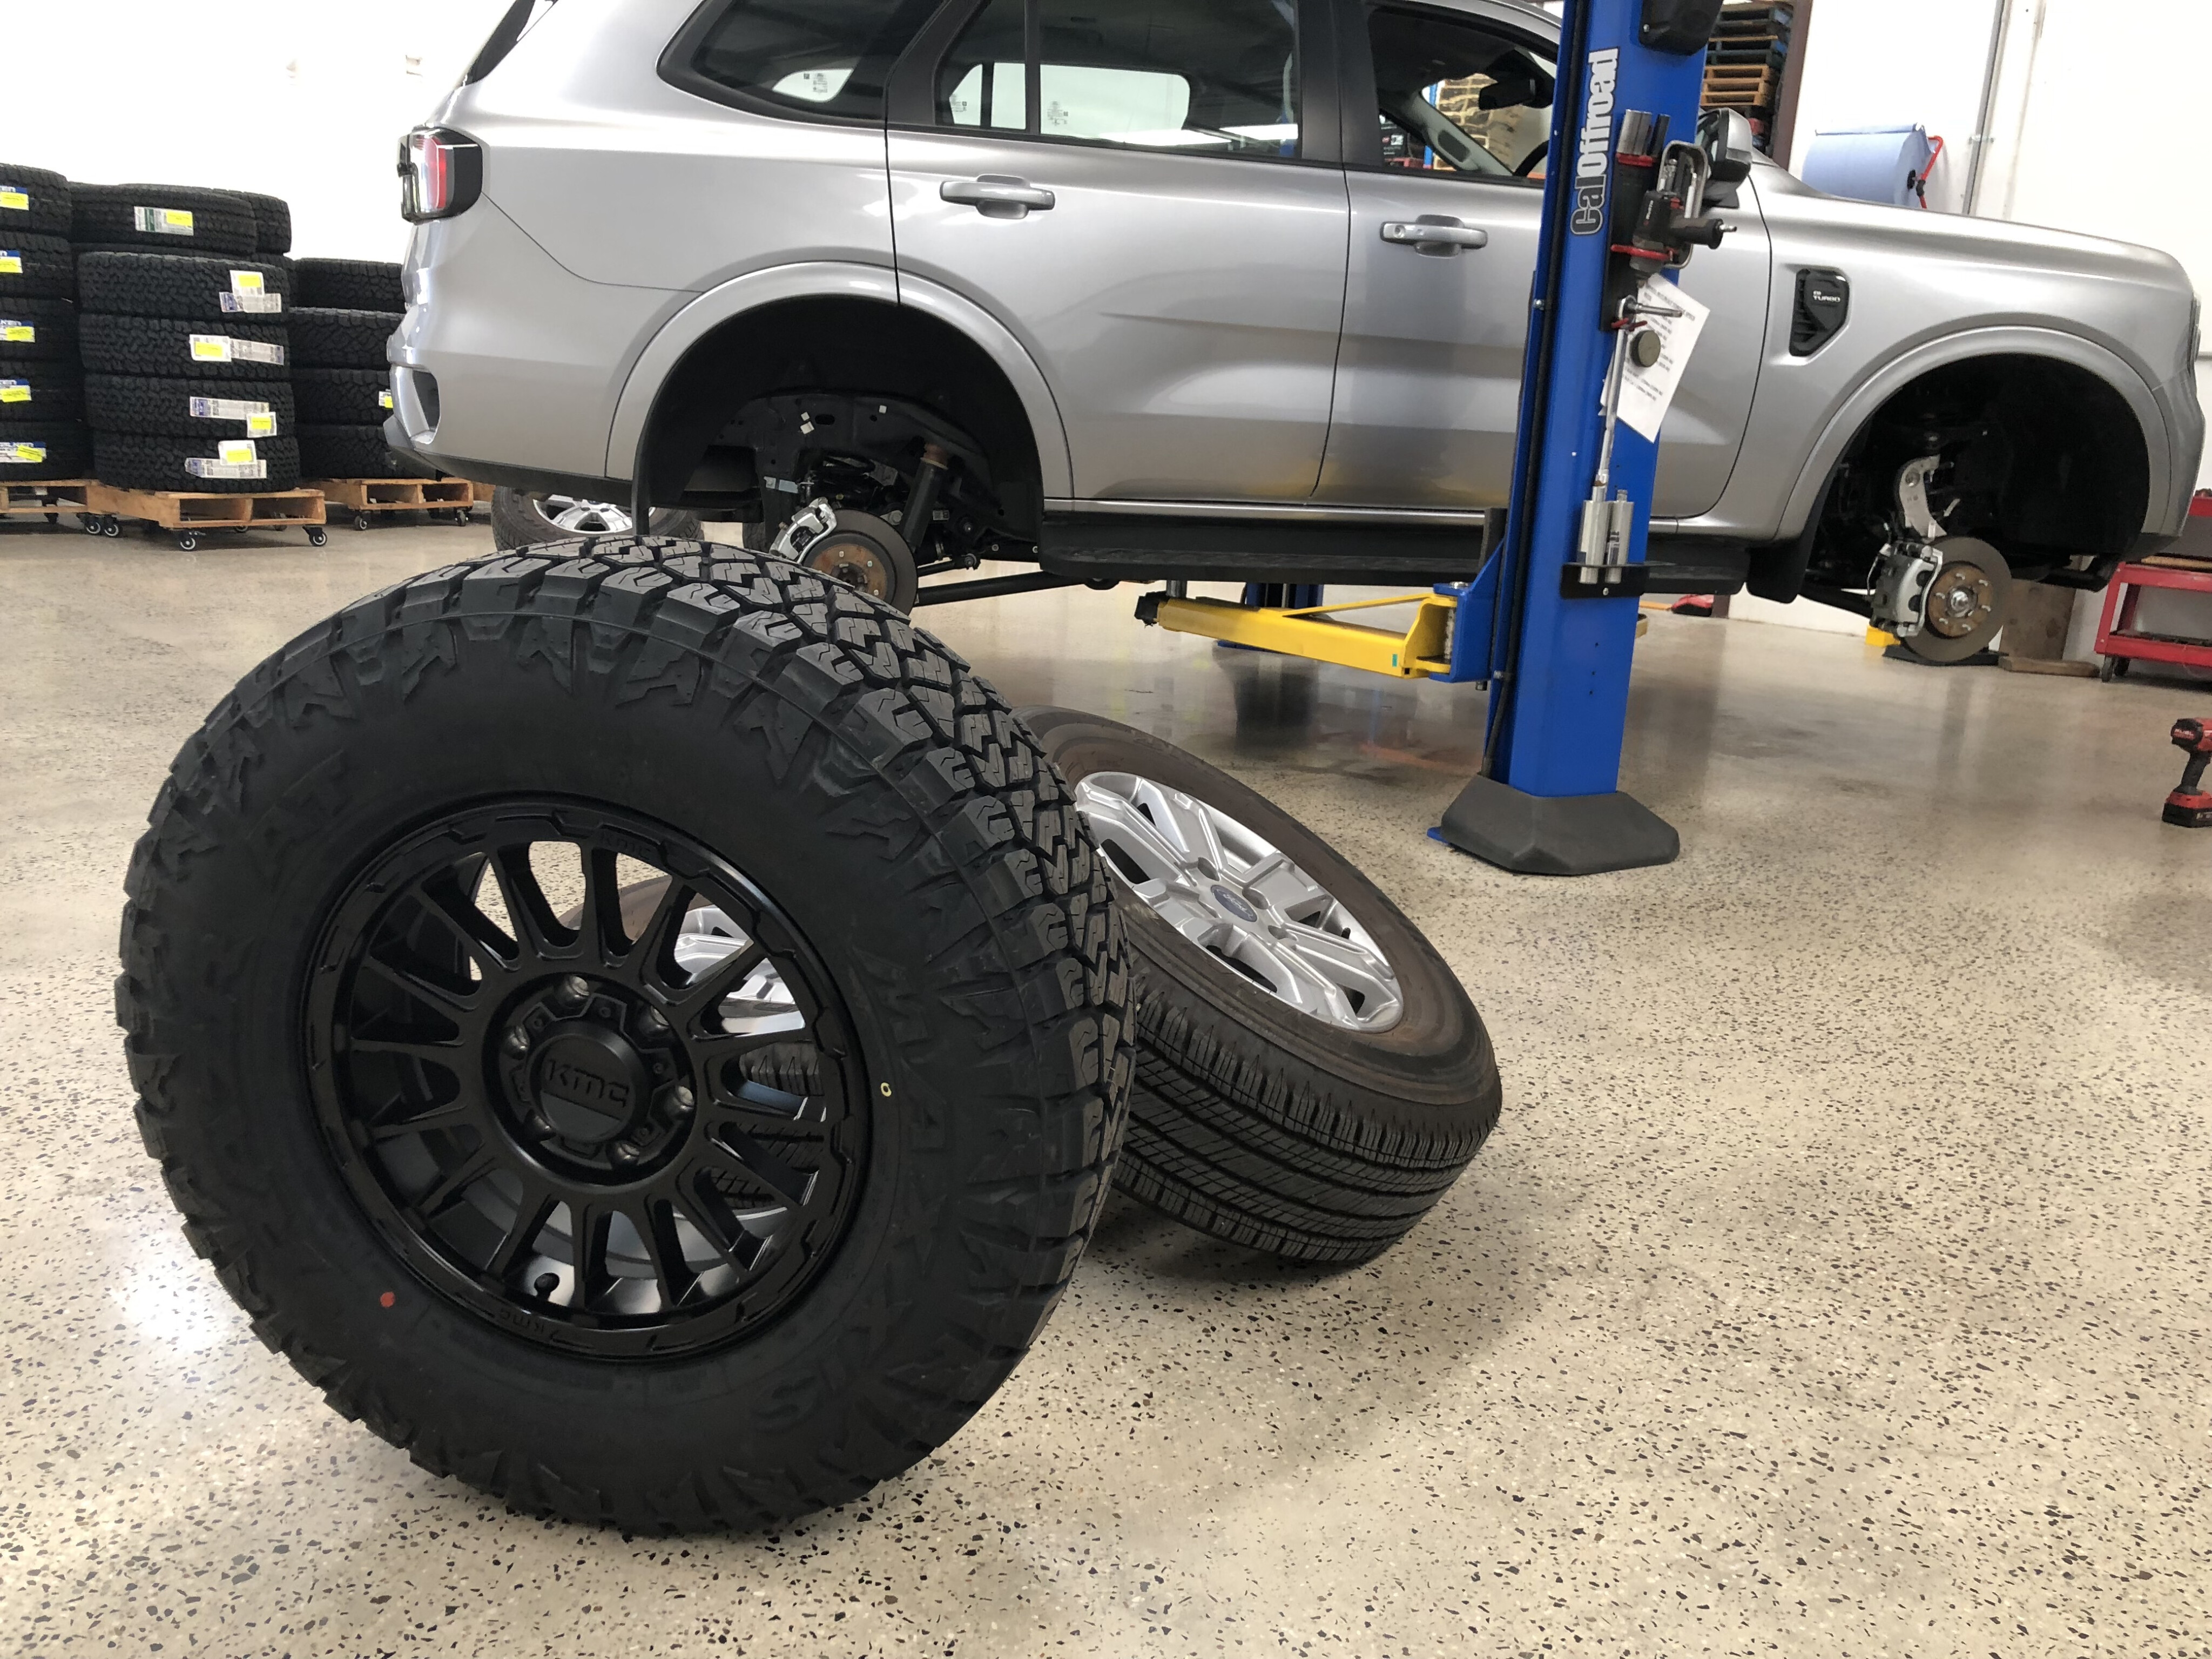 5c011e0d/2023 ford everest kmc impact wheels and maxxis razr tyres 14 JPG